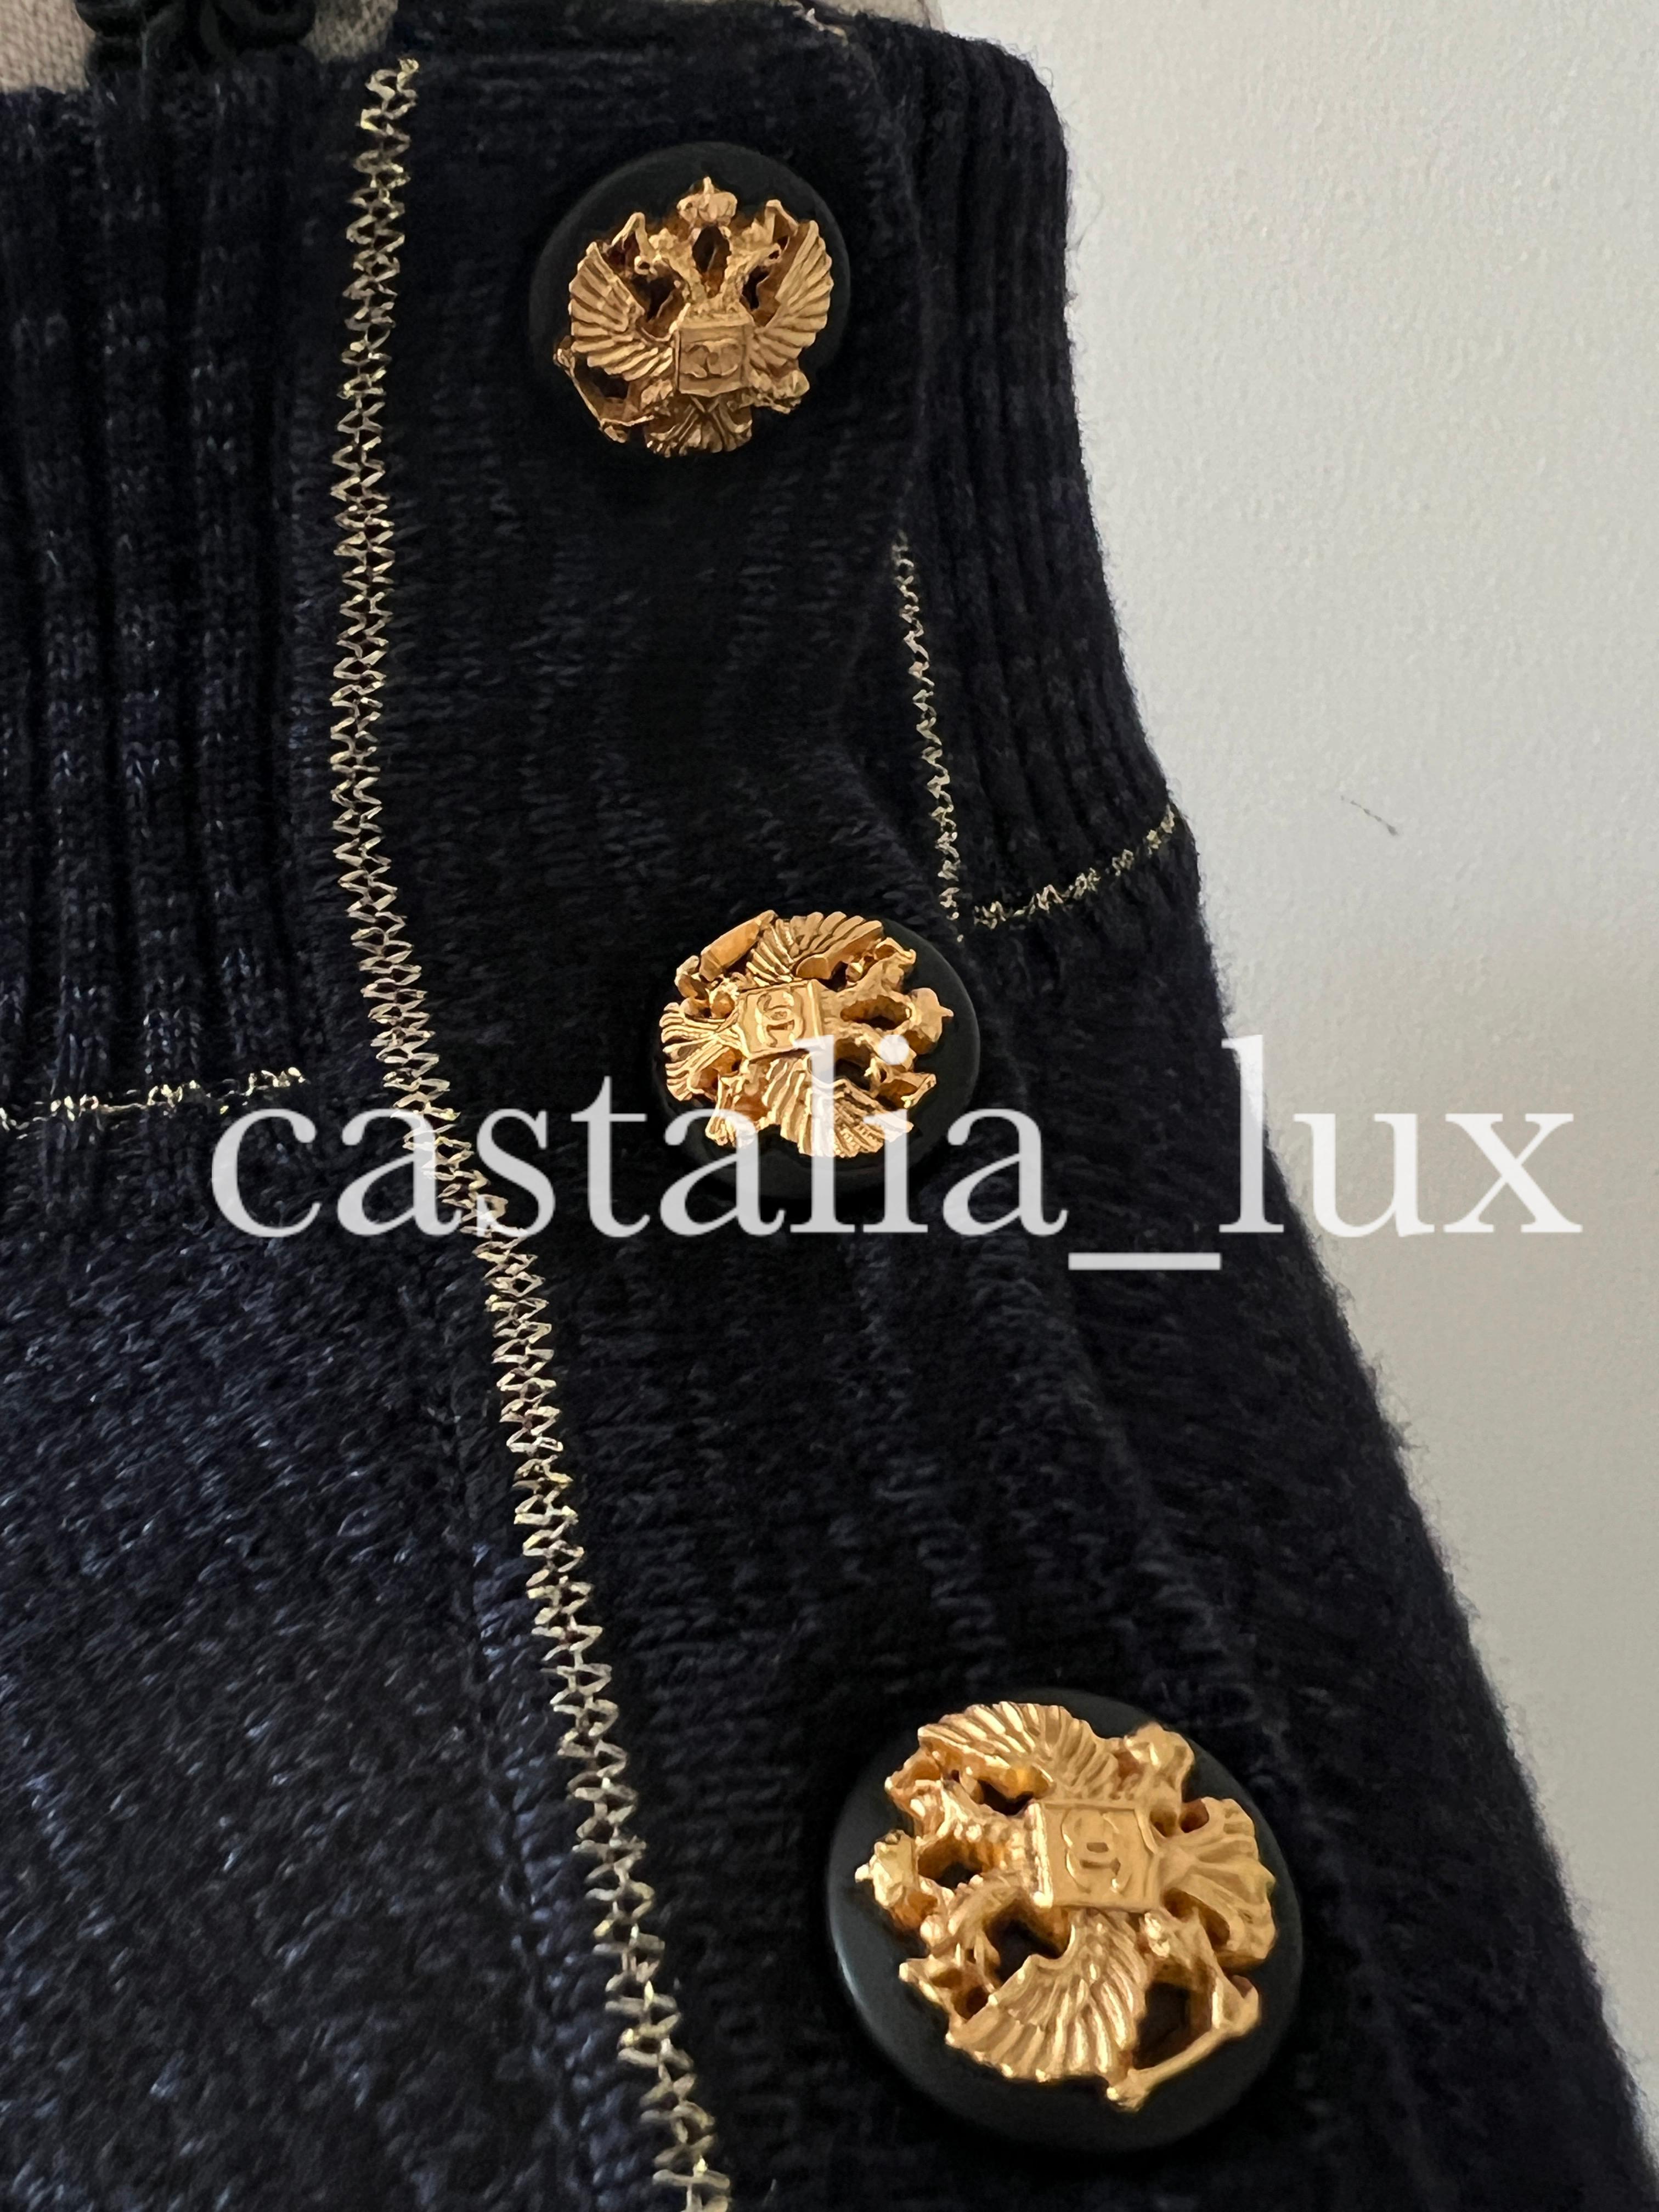 Stunning and rare Chanel jumper with CC logo from 2009 Pre-Fall Metiers d'Art Collection, 09a 
- made of softest wool, silk and cashmere blend 
- CC logo buttons with eagles at each shoulder 
Size mark 36 fr. kept unworn.